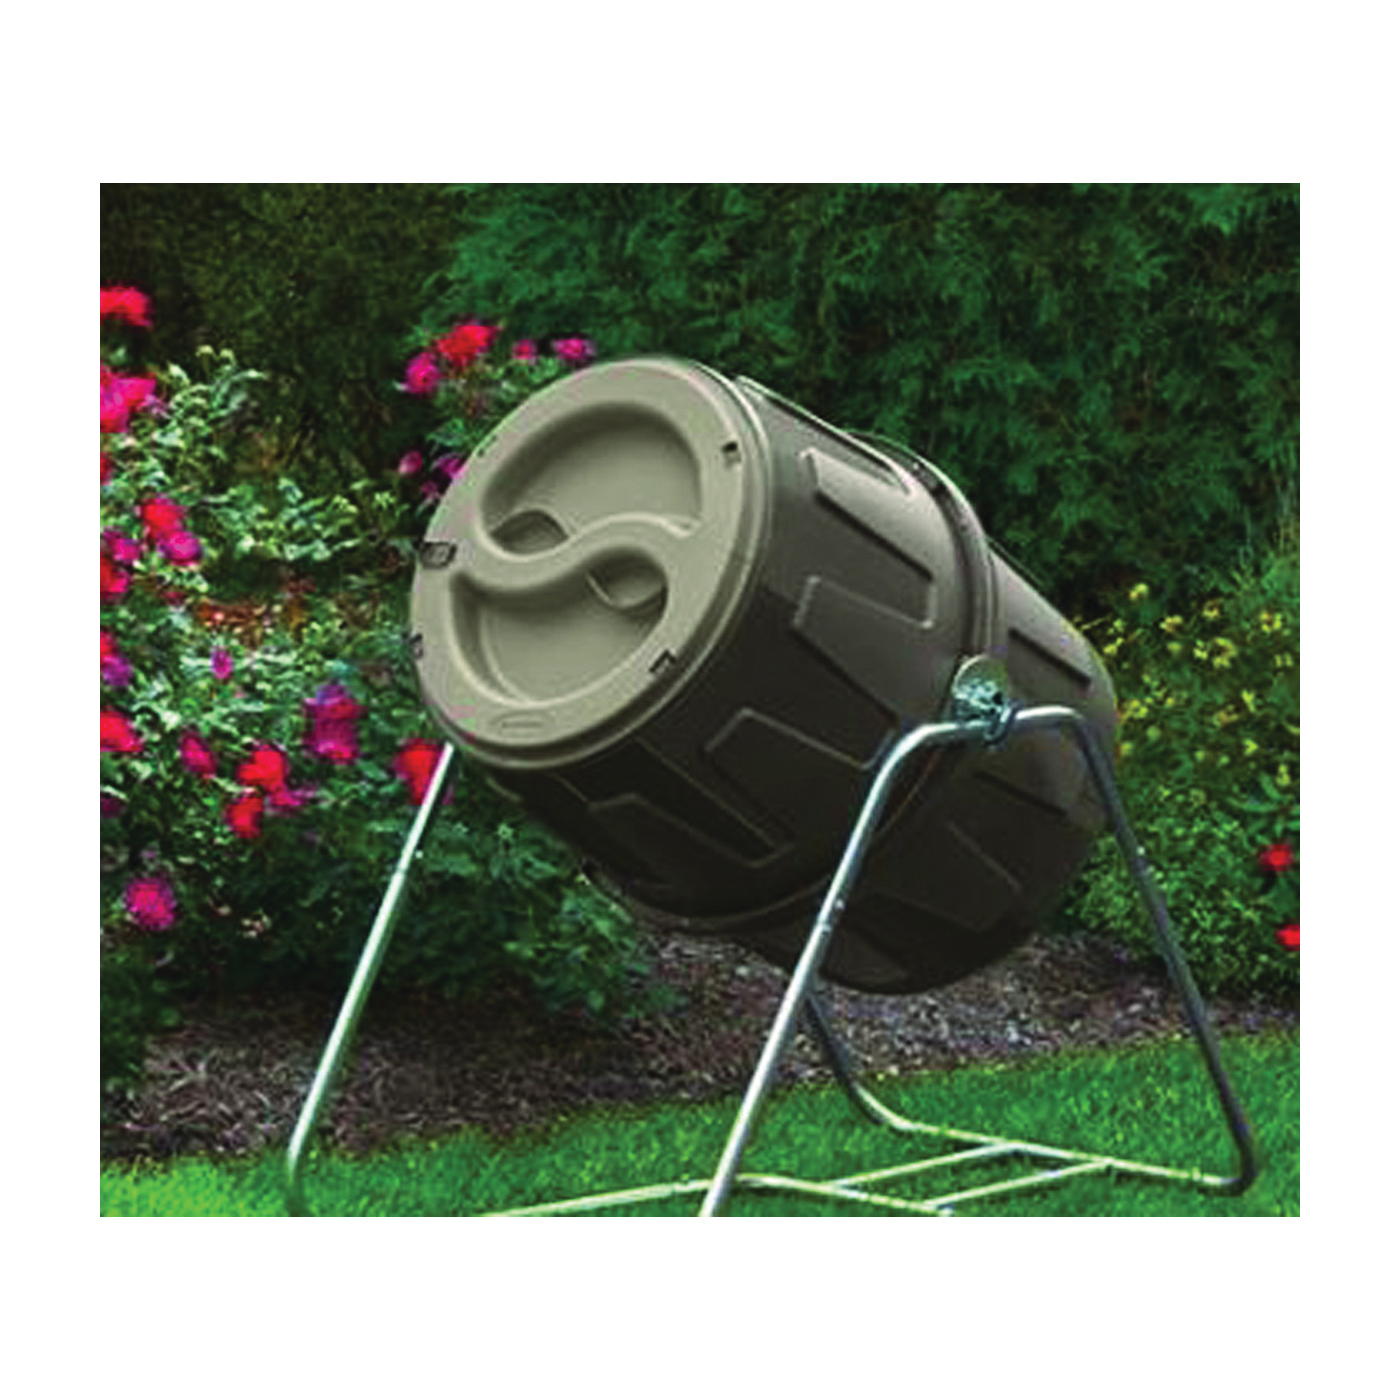 Tumbler Composters